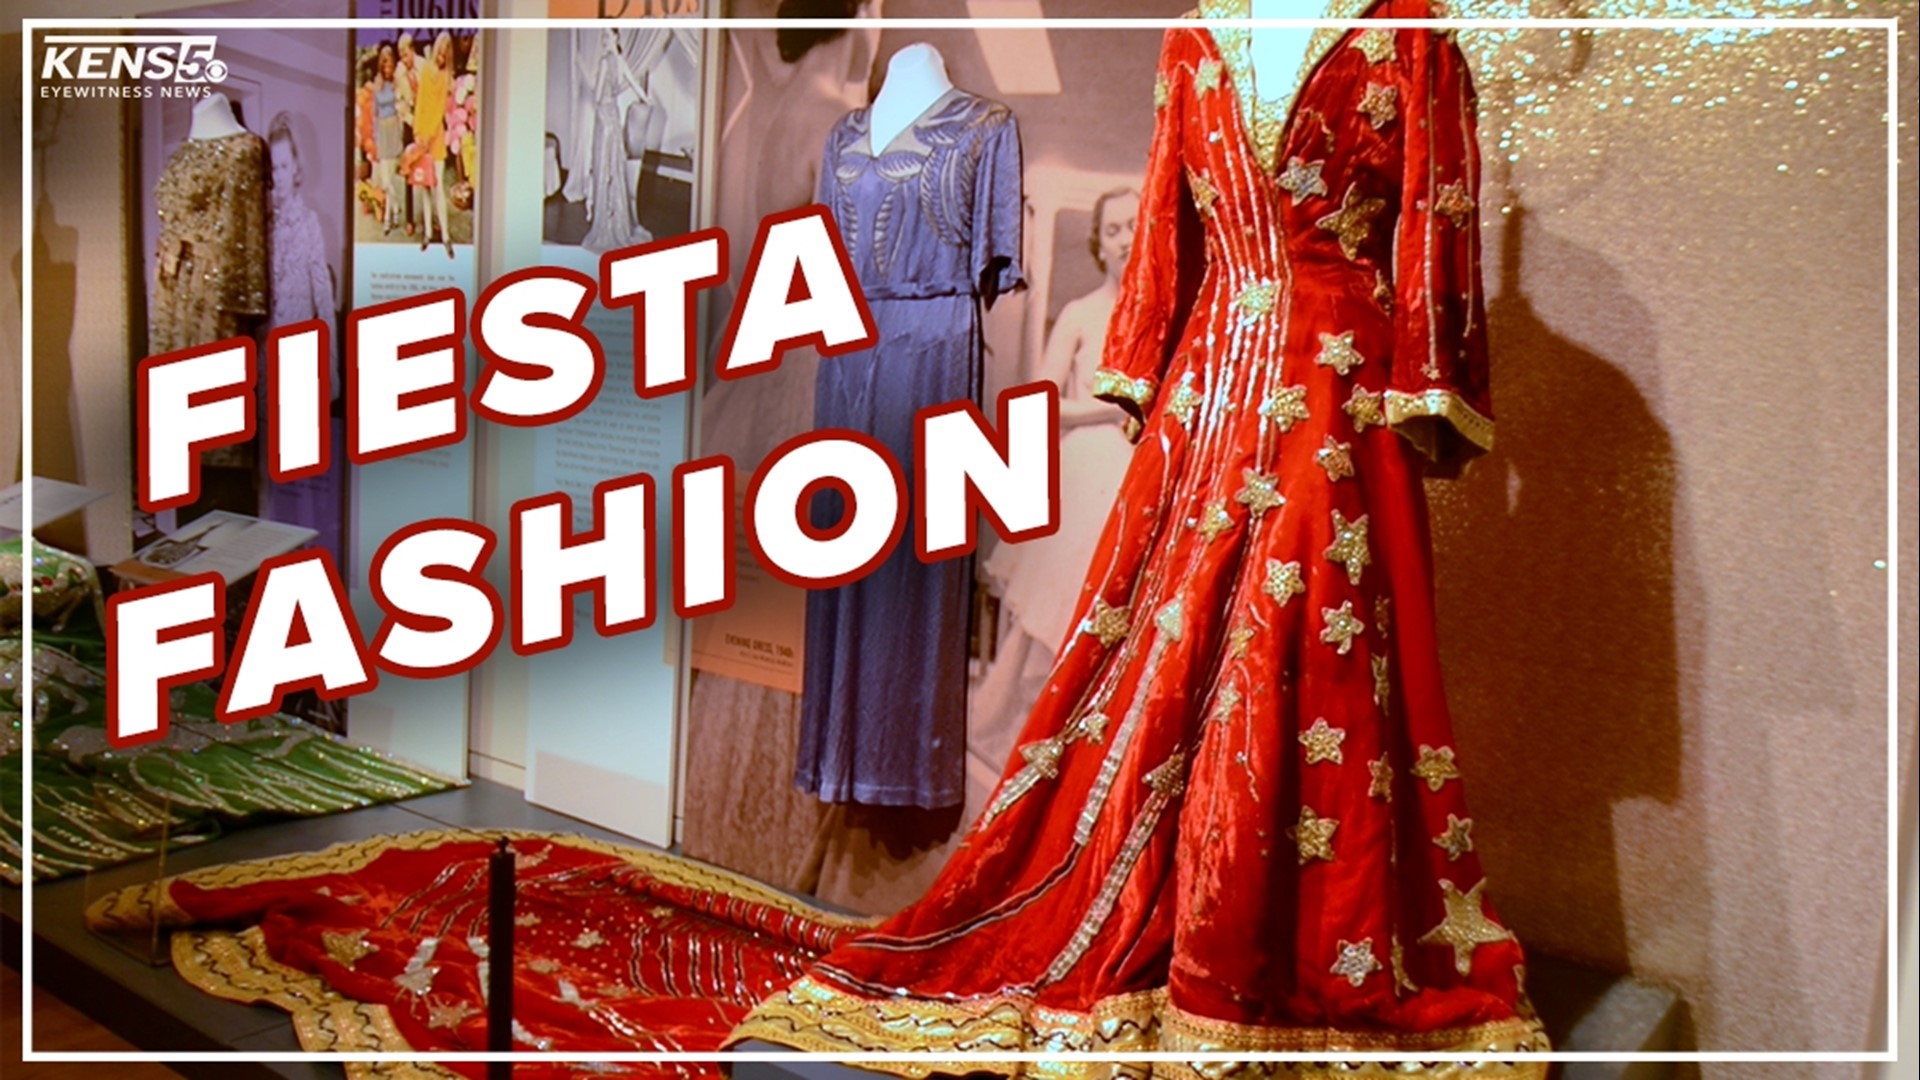 Fiesta fashion is once again on display at the Witte Museum. The Fiesta Vogue exhibit goes until July 31.